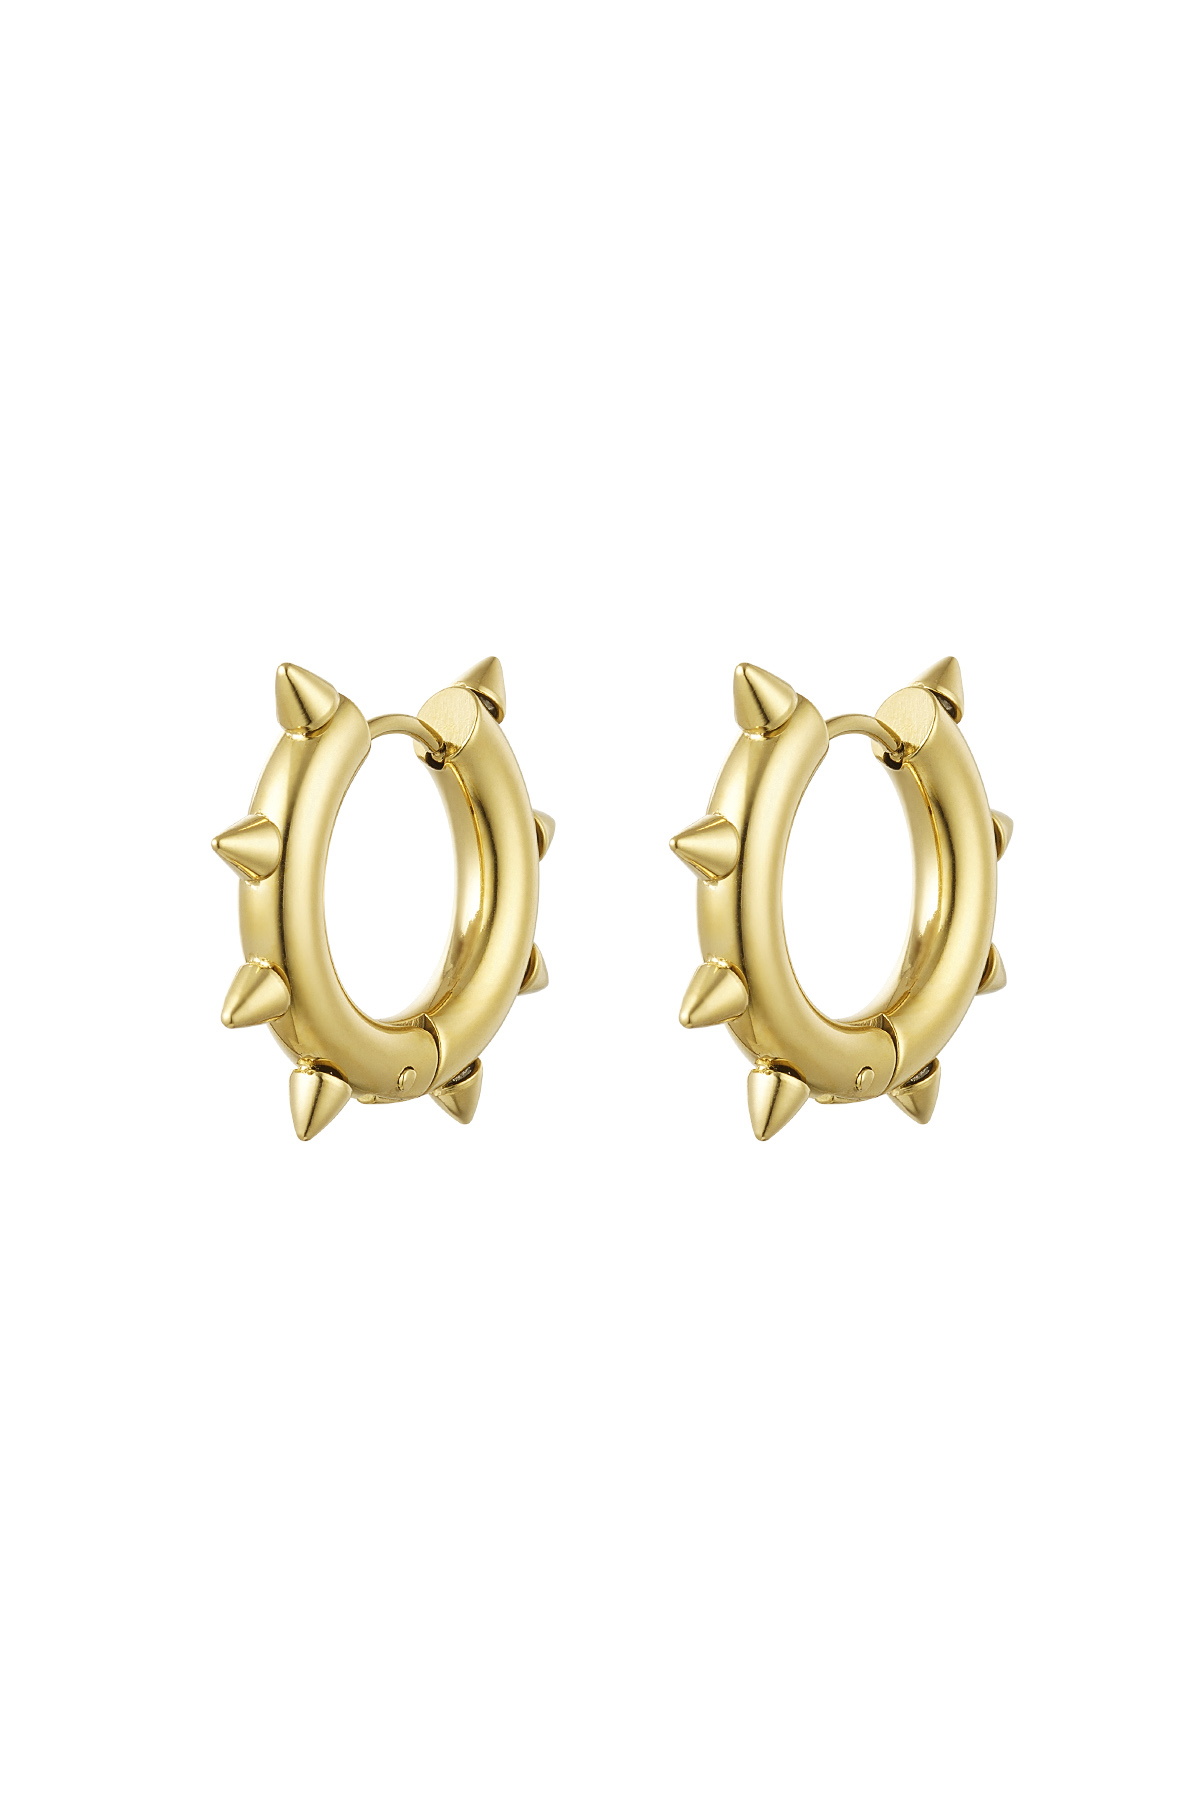 Earrings round spikes large - gold Stainless Steel